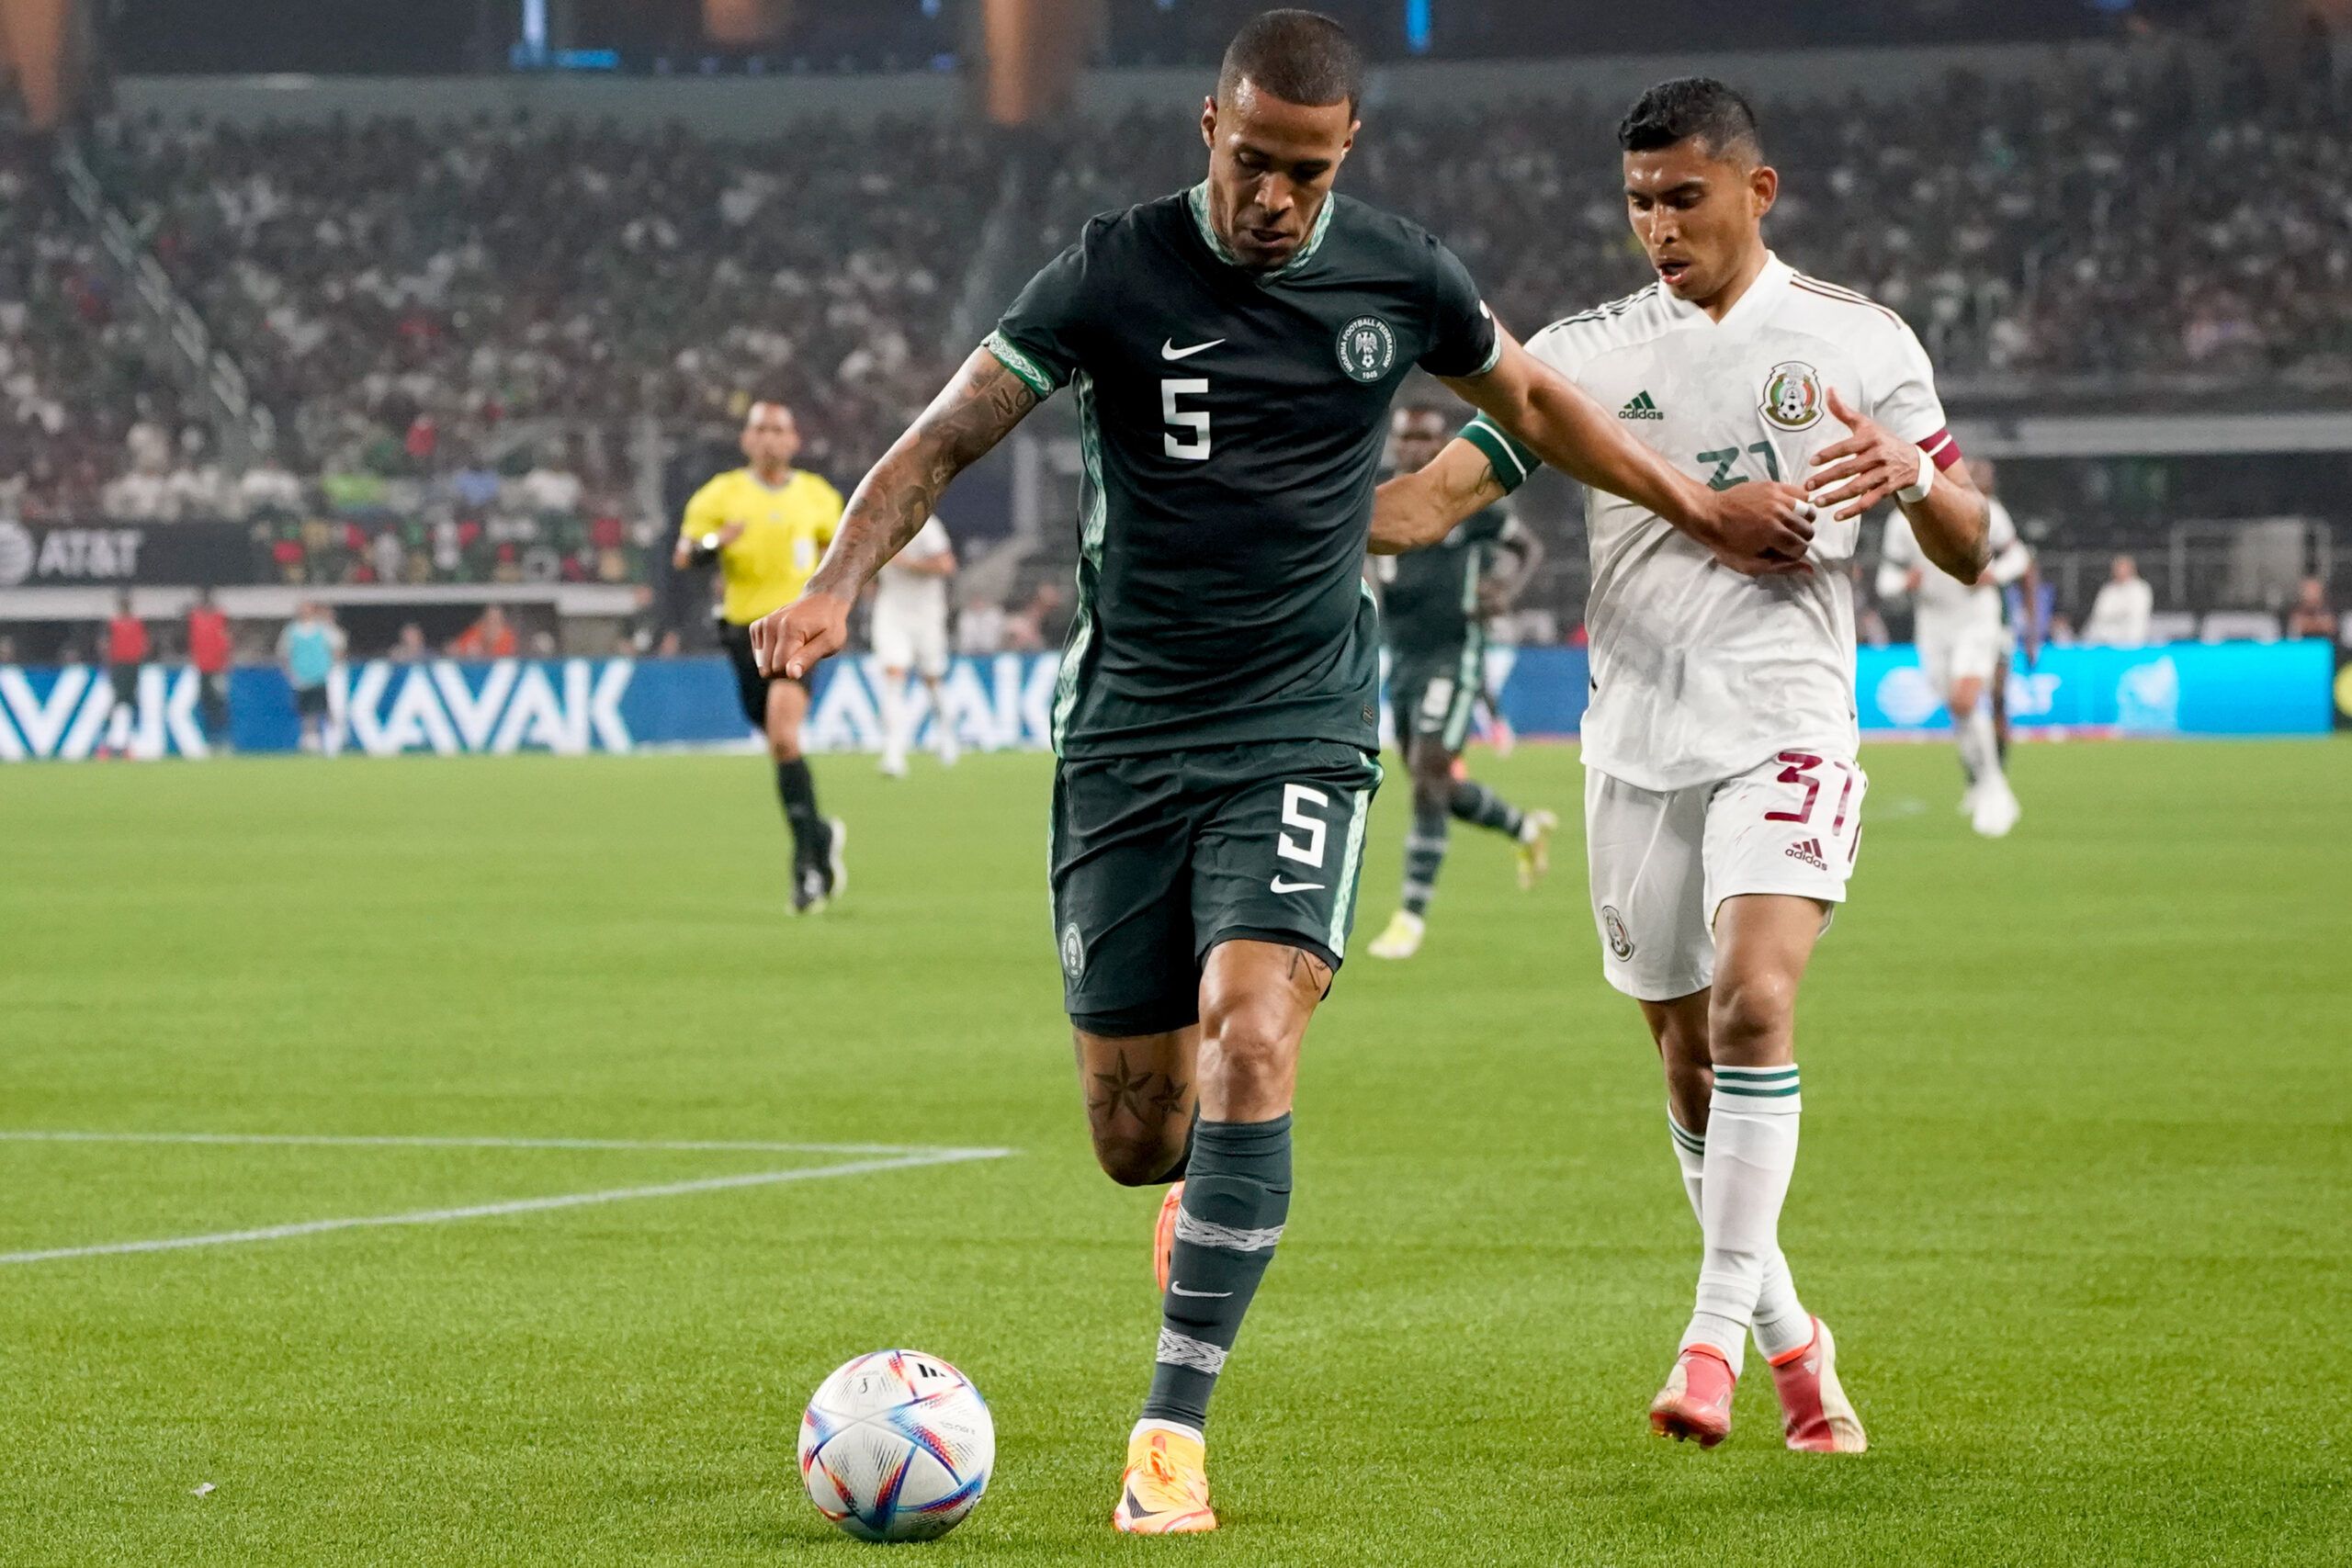 May 28, 2022; Arlington, TX, USA; Nigeria defender William Troost-Ekong (5) and Mexico midfielder Orbelin Pineda (31) fight for possession of the ball during the second half at AT&amp;T Stadium. Mandatory Credit: Chris Jones-USA TODAY Sports